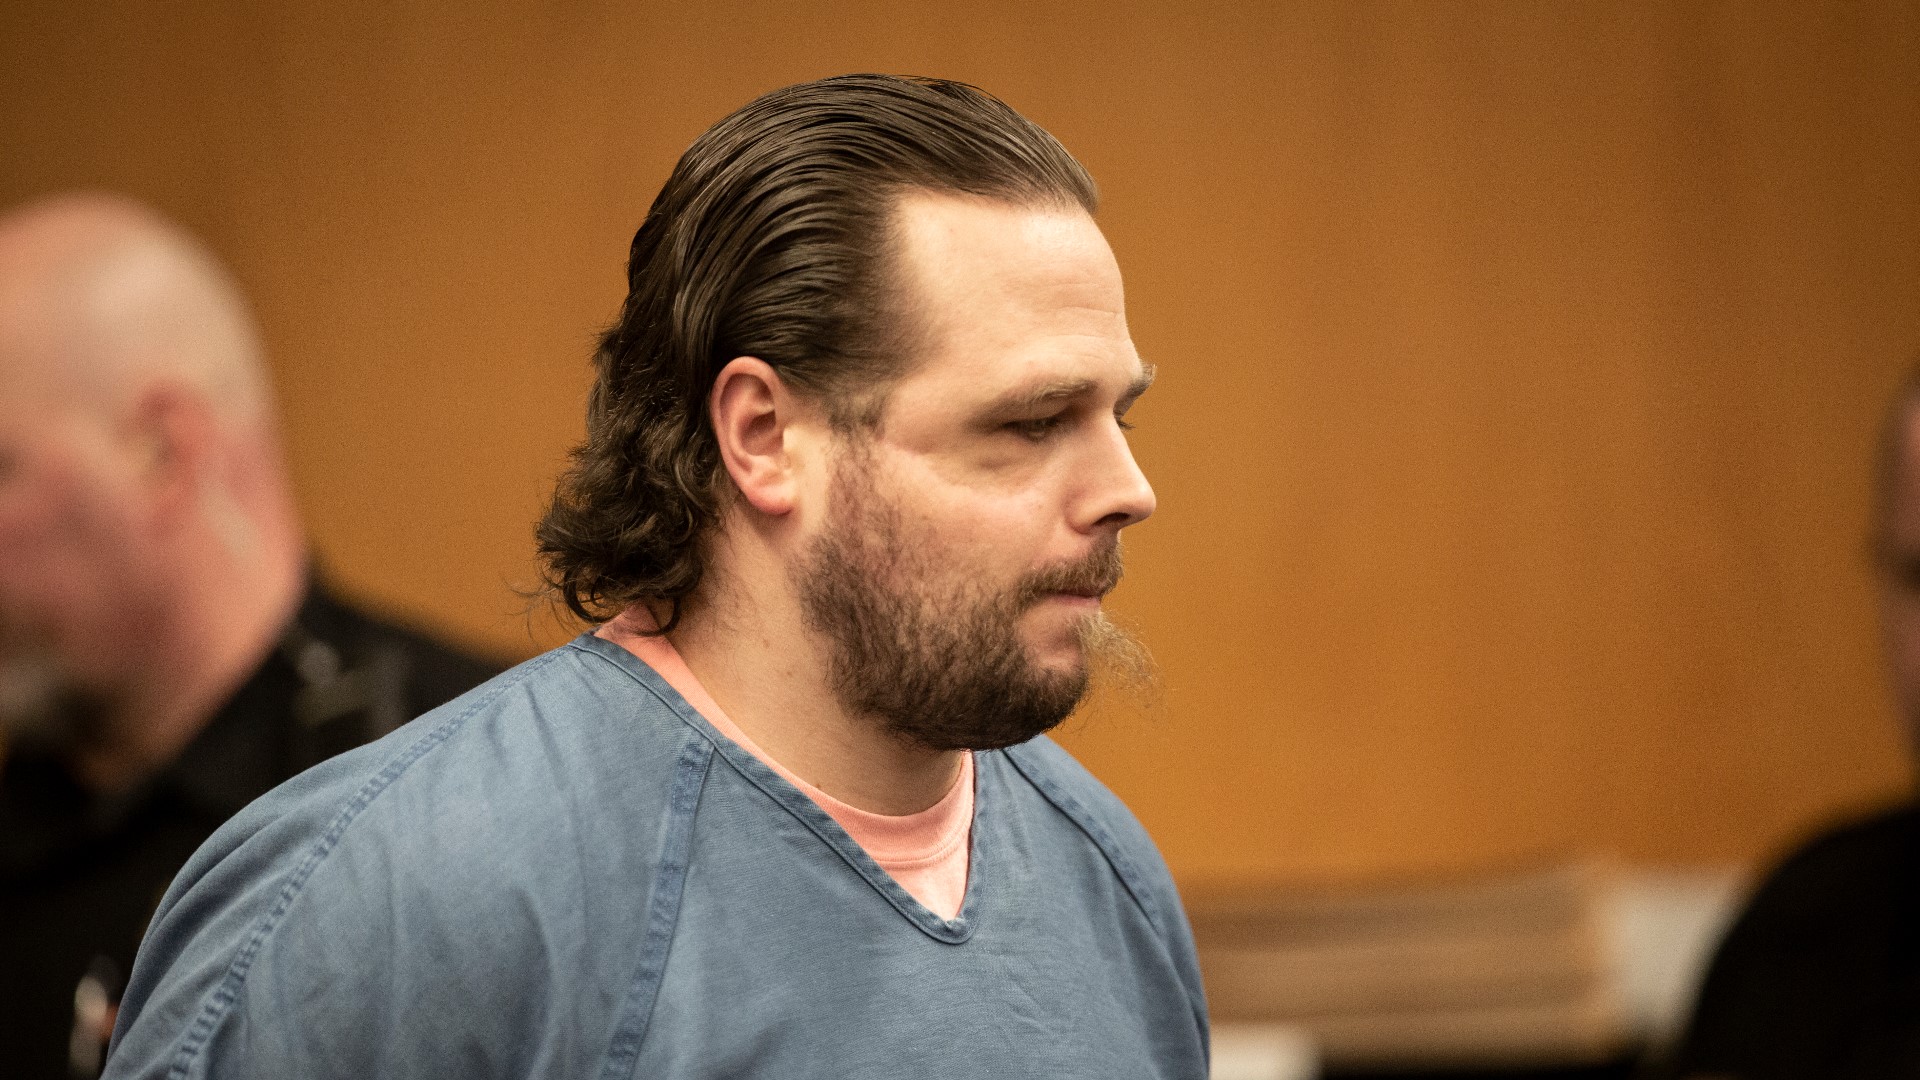 Closing arguments on Wednesday brought an end to three weeks of grueling witness testimony in the Jeremy Christian case. The jury is now deliberating.